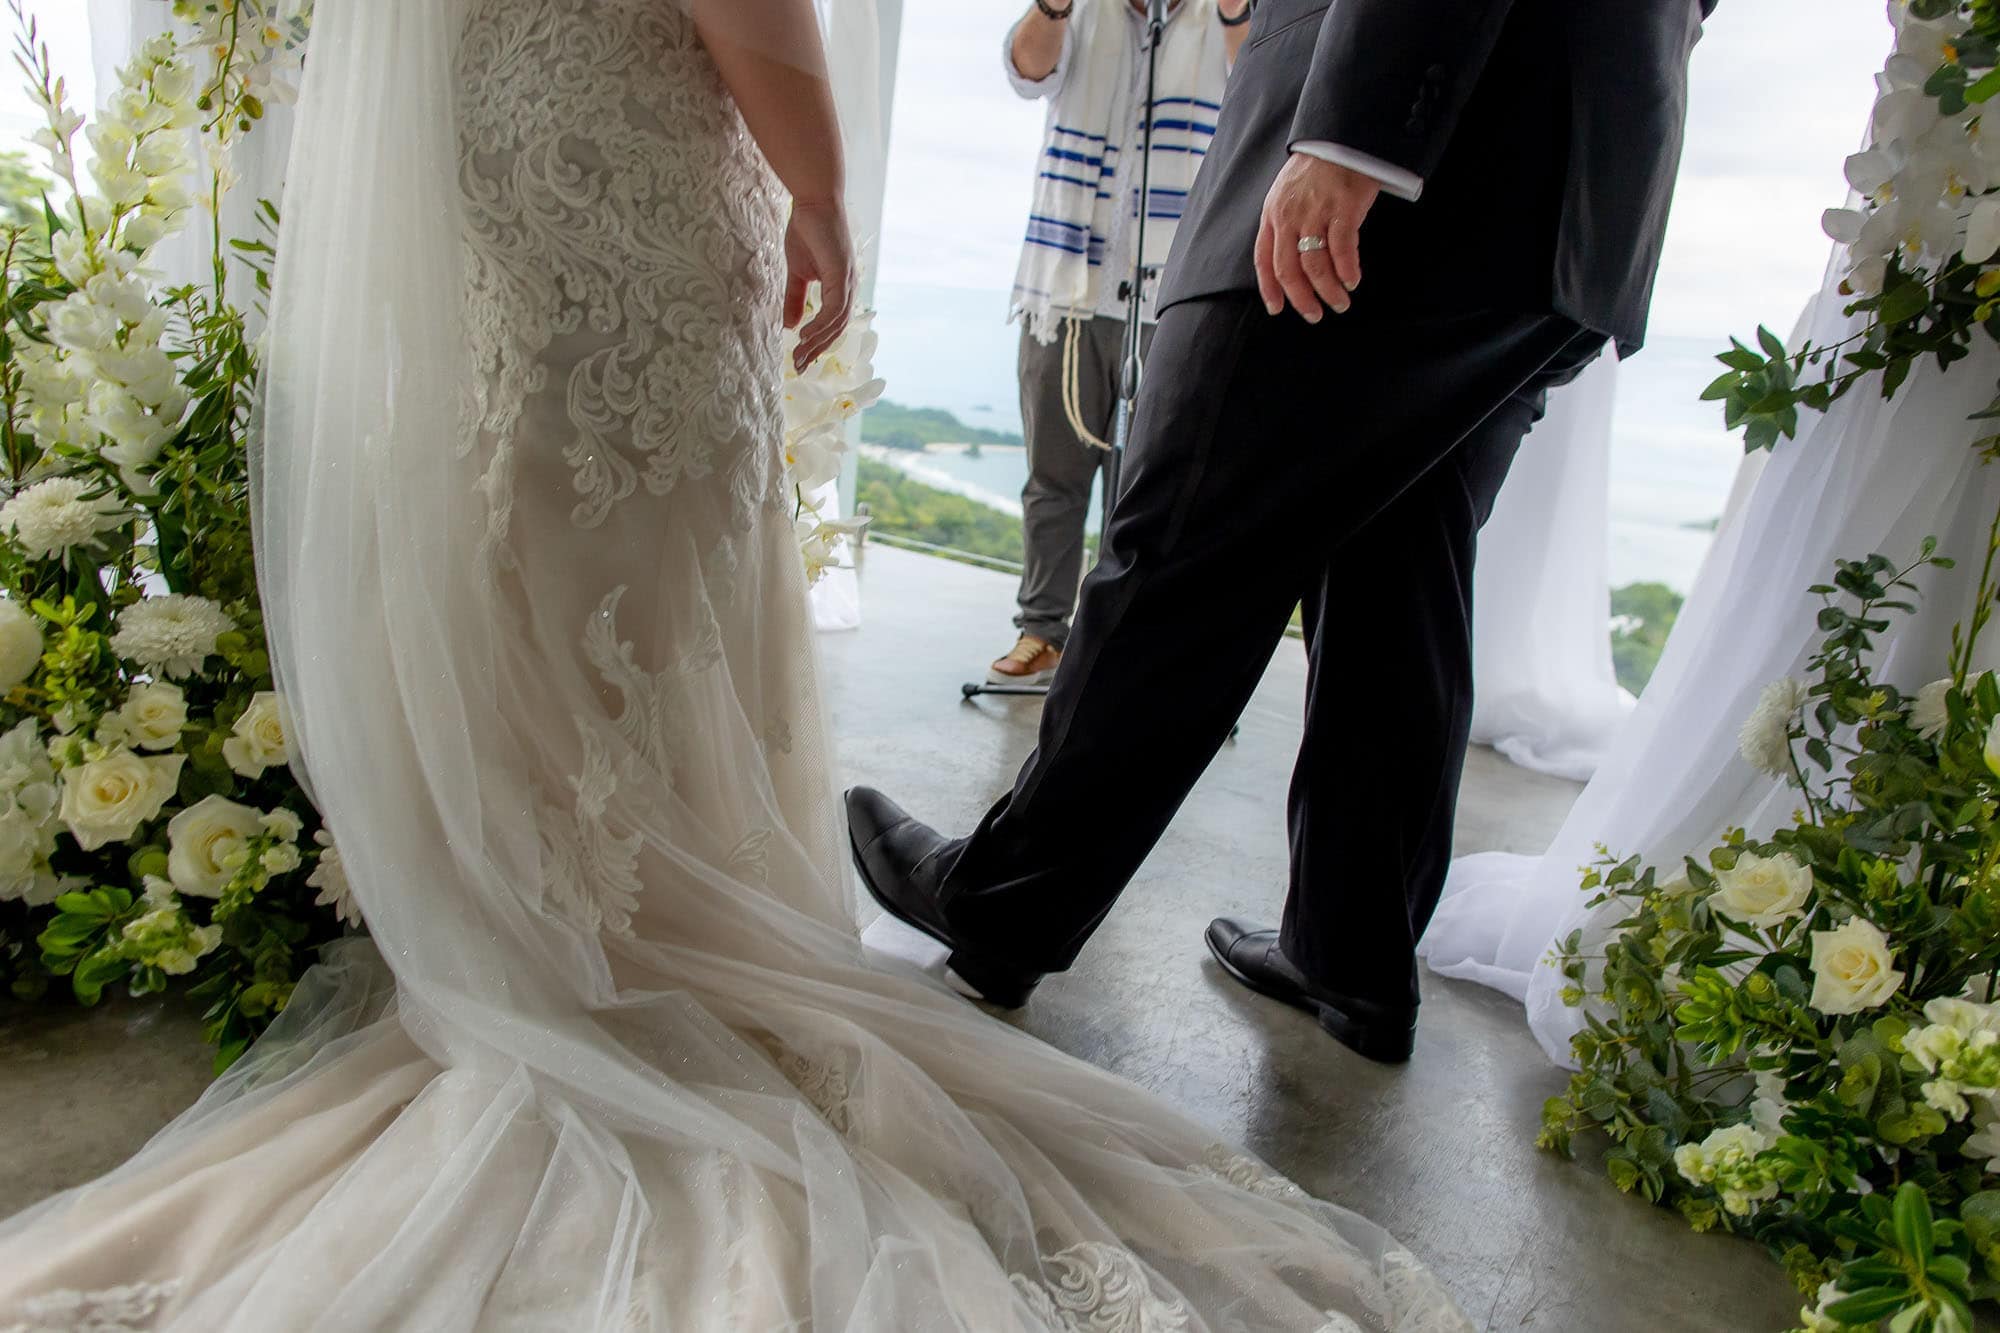 Groom breaks the glass under his foot as a Jewish wedding tradition